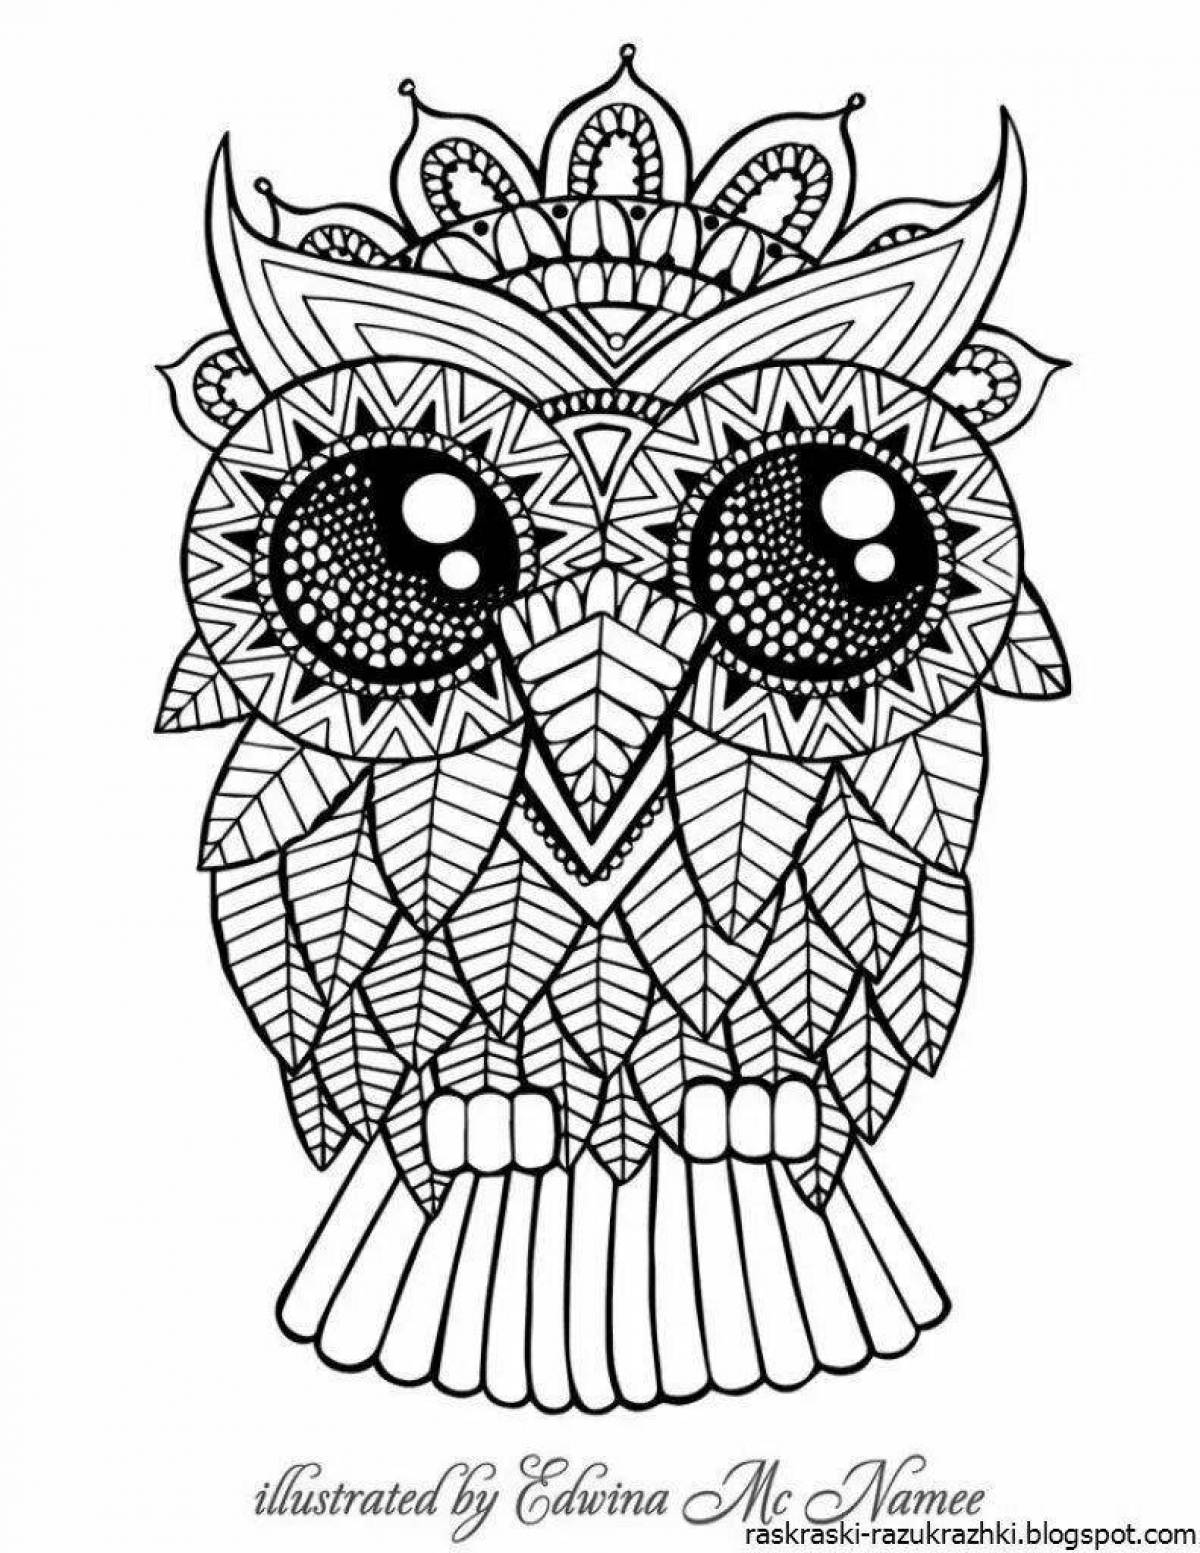 Great anti-stress animal coloring book for kids